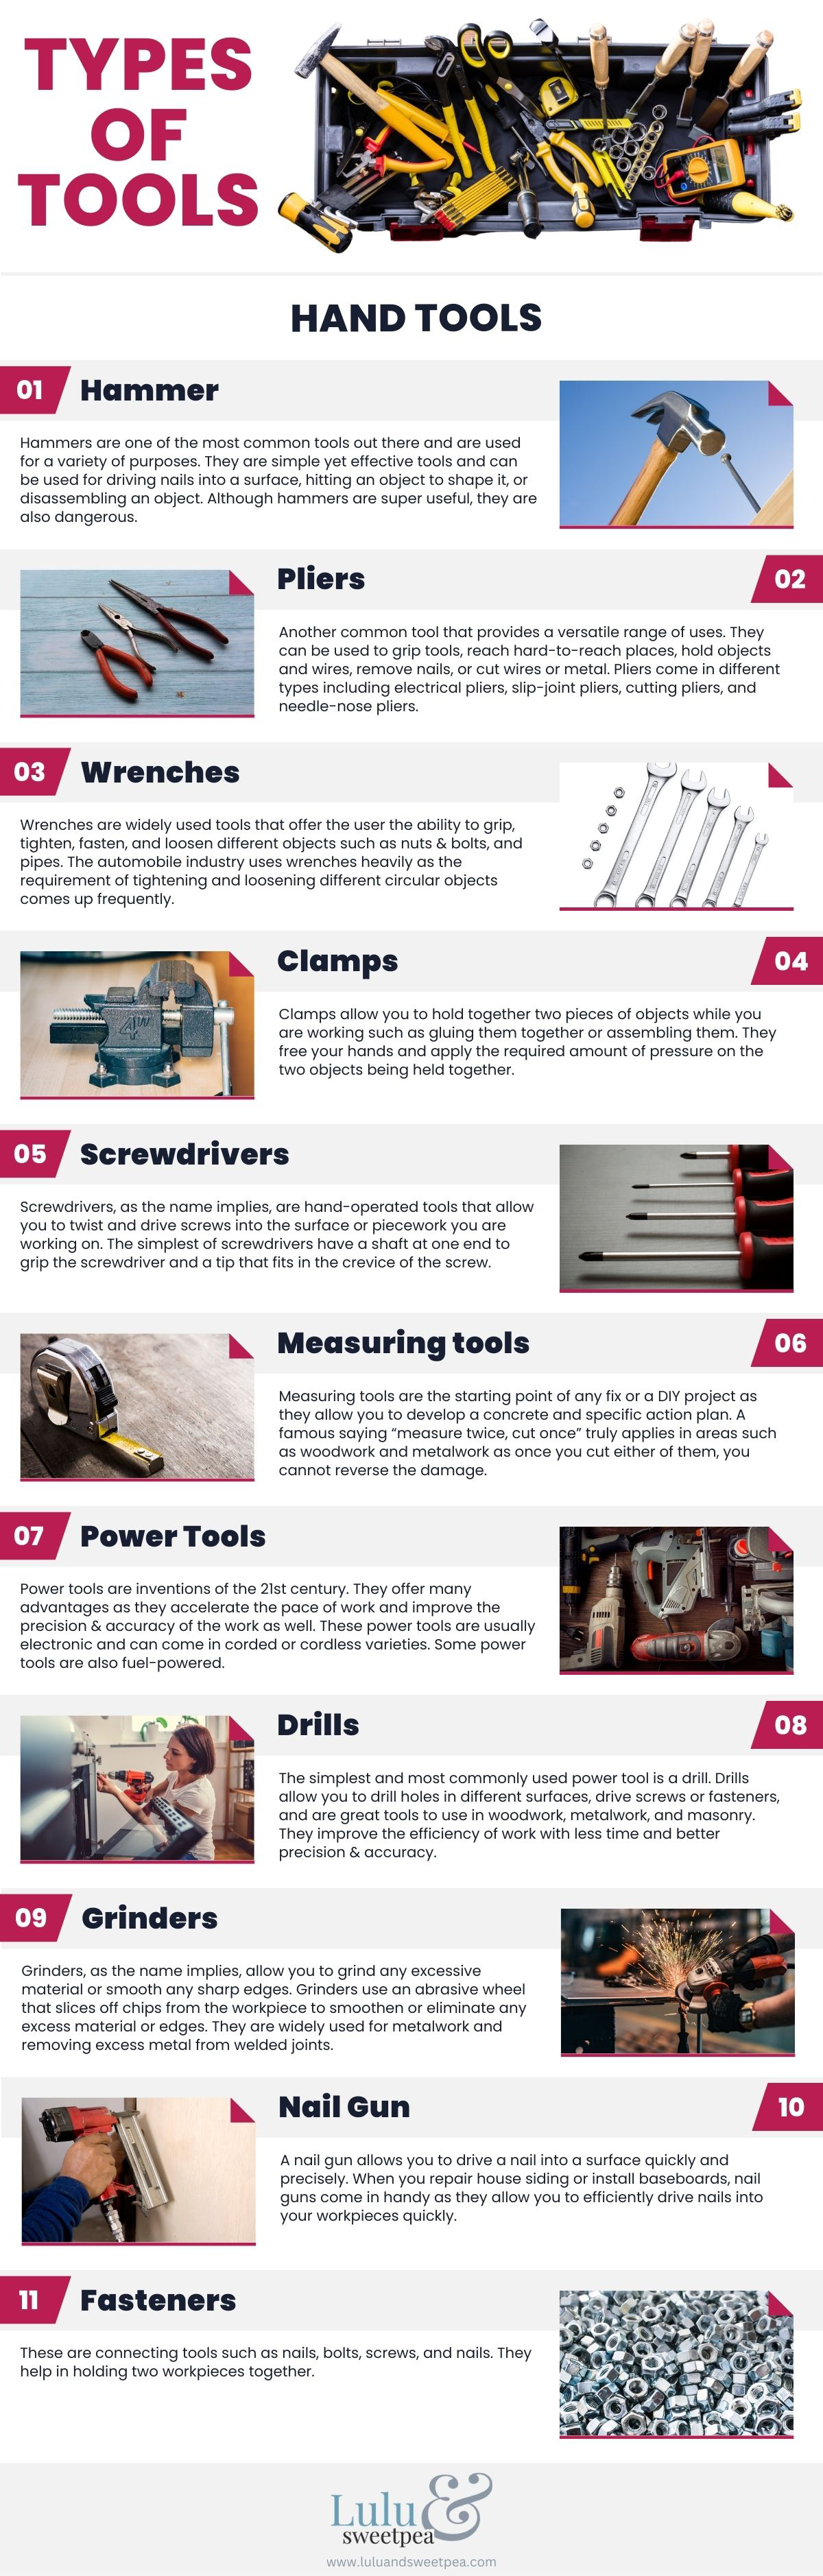 Types of Tools